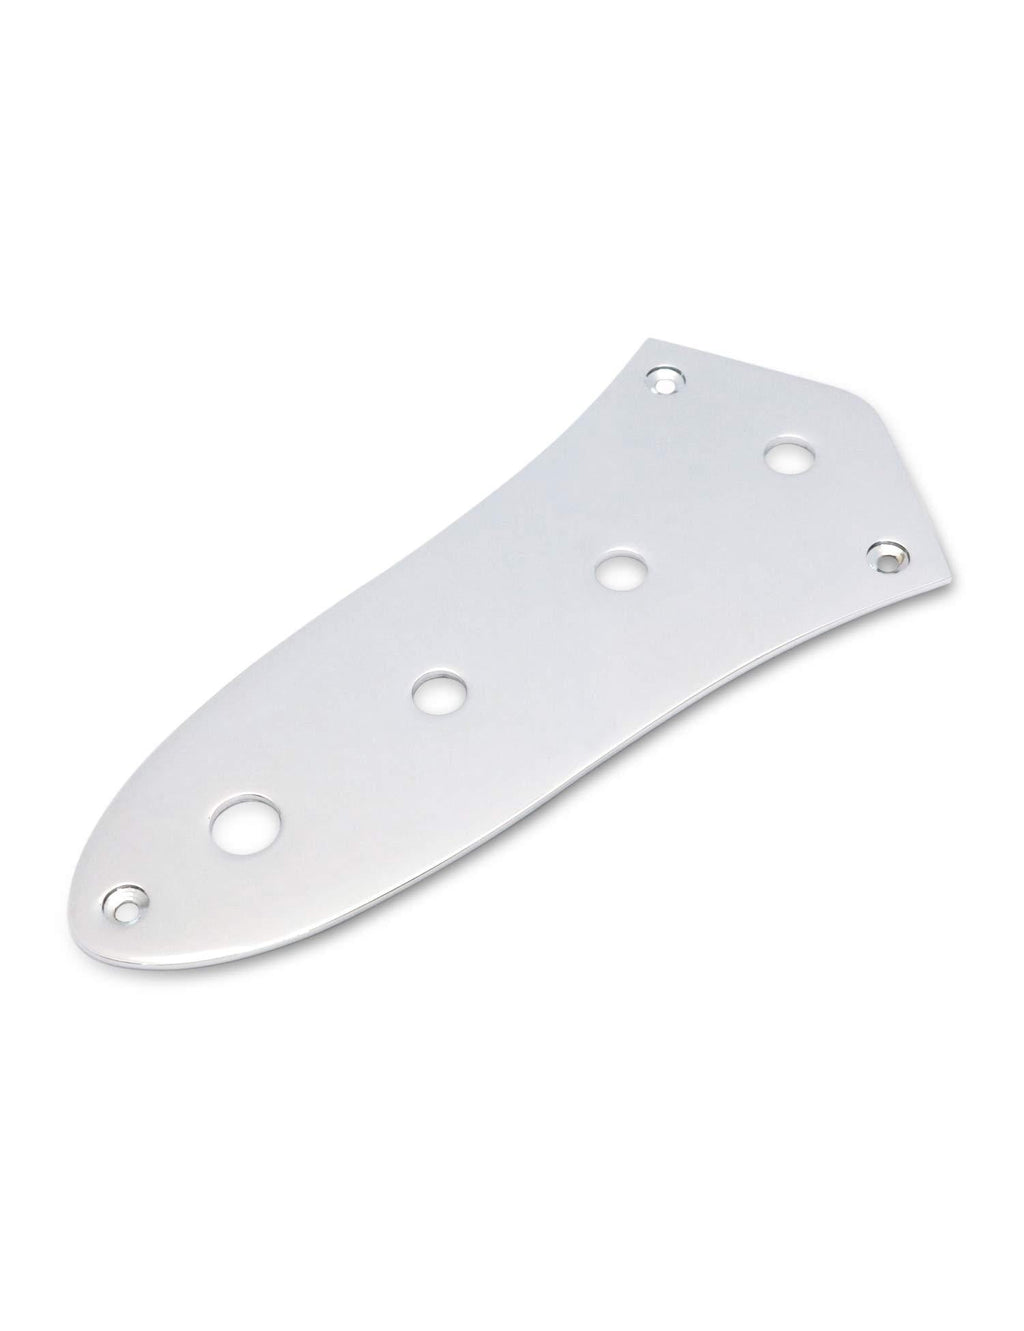 Metallor Bass Control Plate Mounting Plate 4 Holes for Jazz Bass Guitar Parts Replacement Chrome.